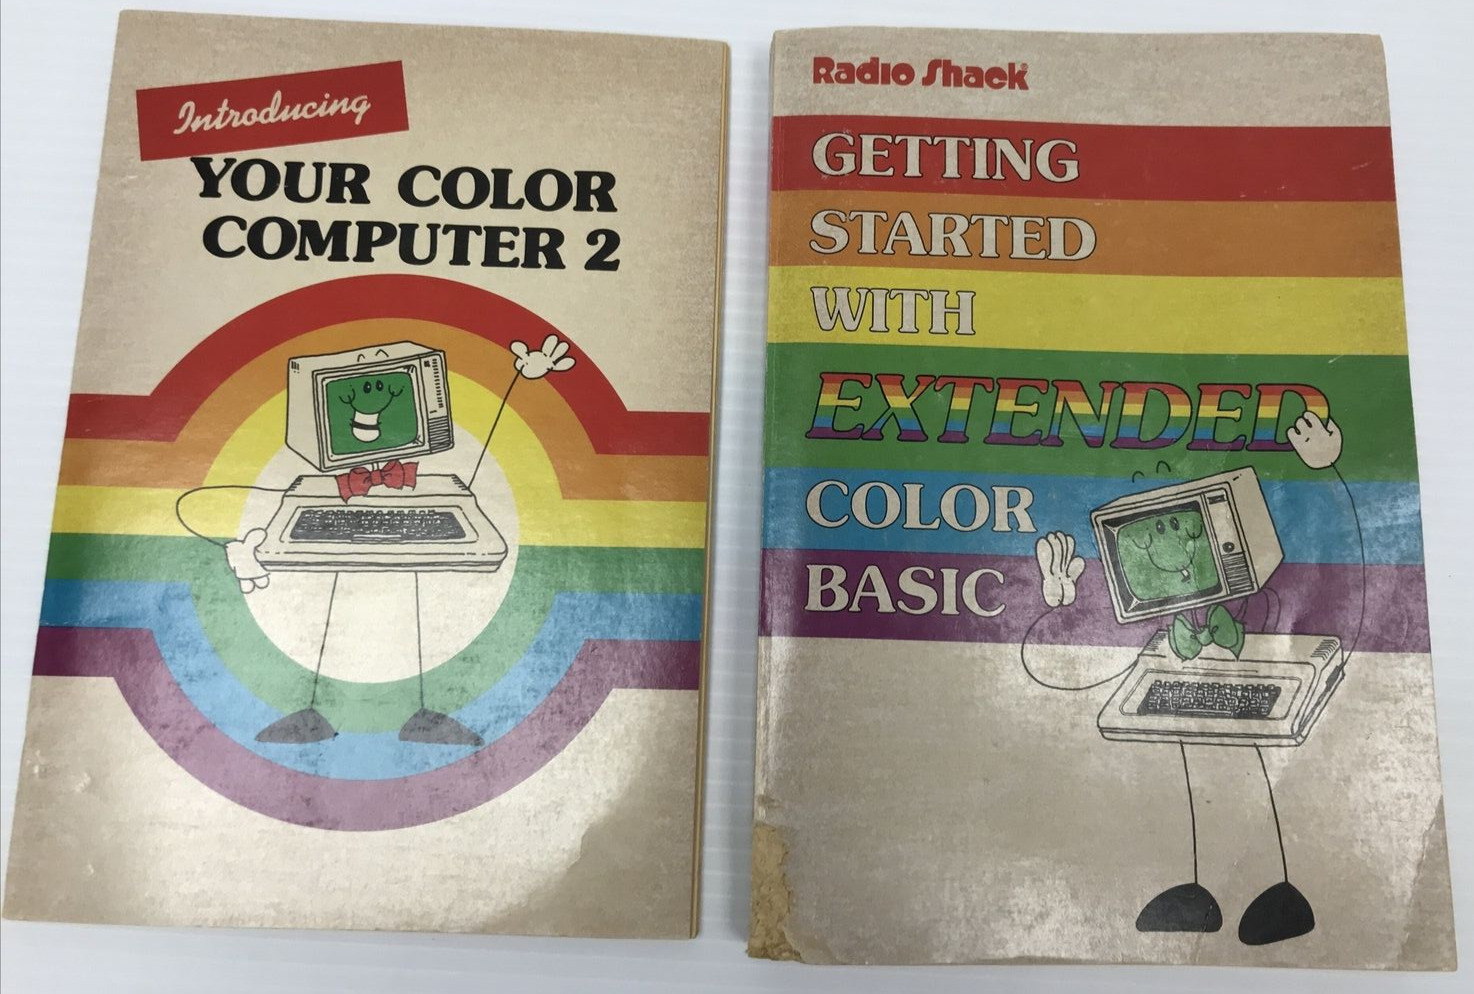 Getting Started with Extended Color Basic ~2 Books~ Radio Shack/Tandy Corp